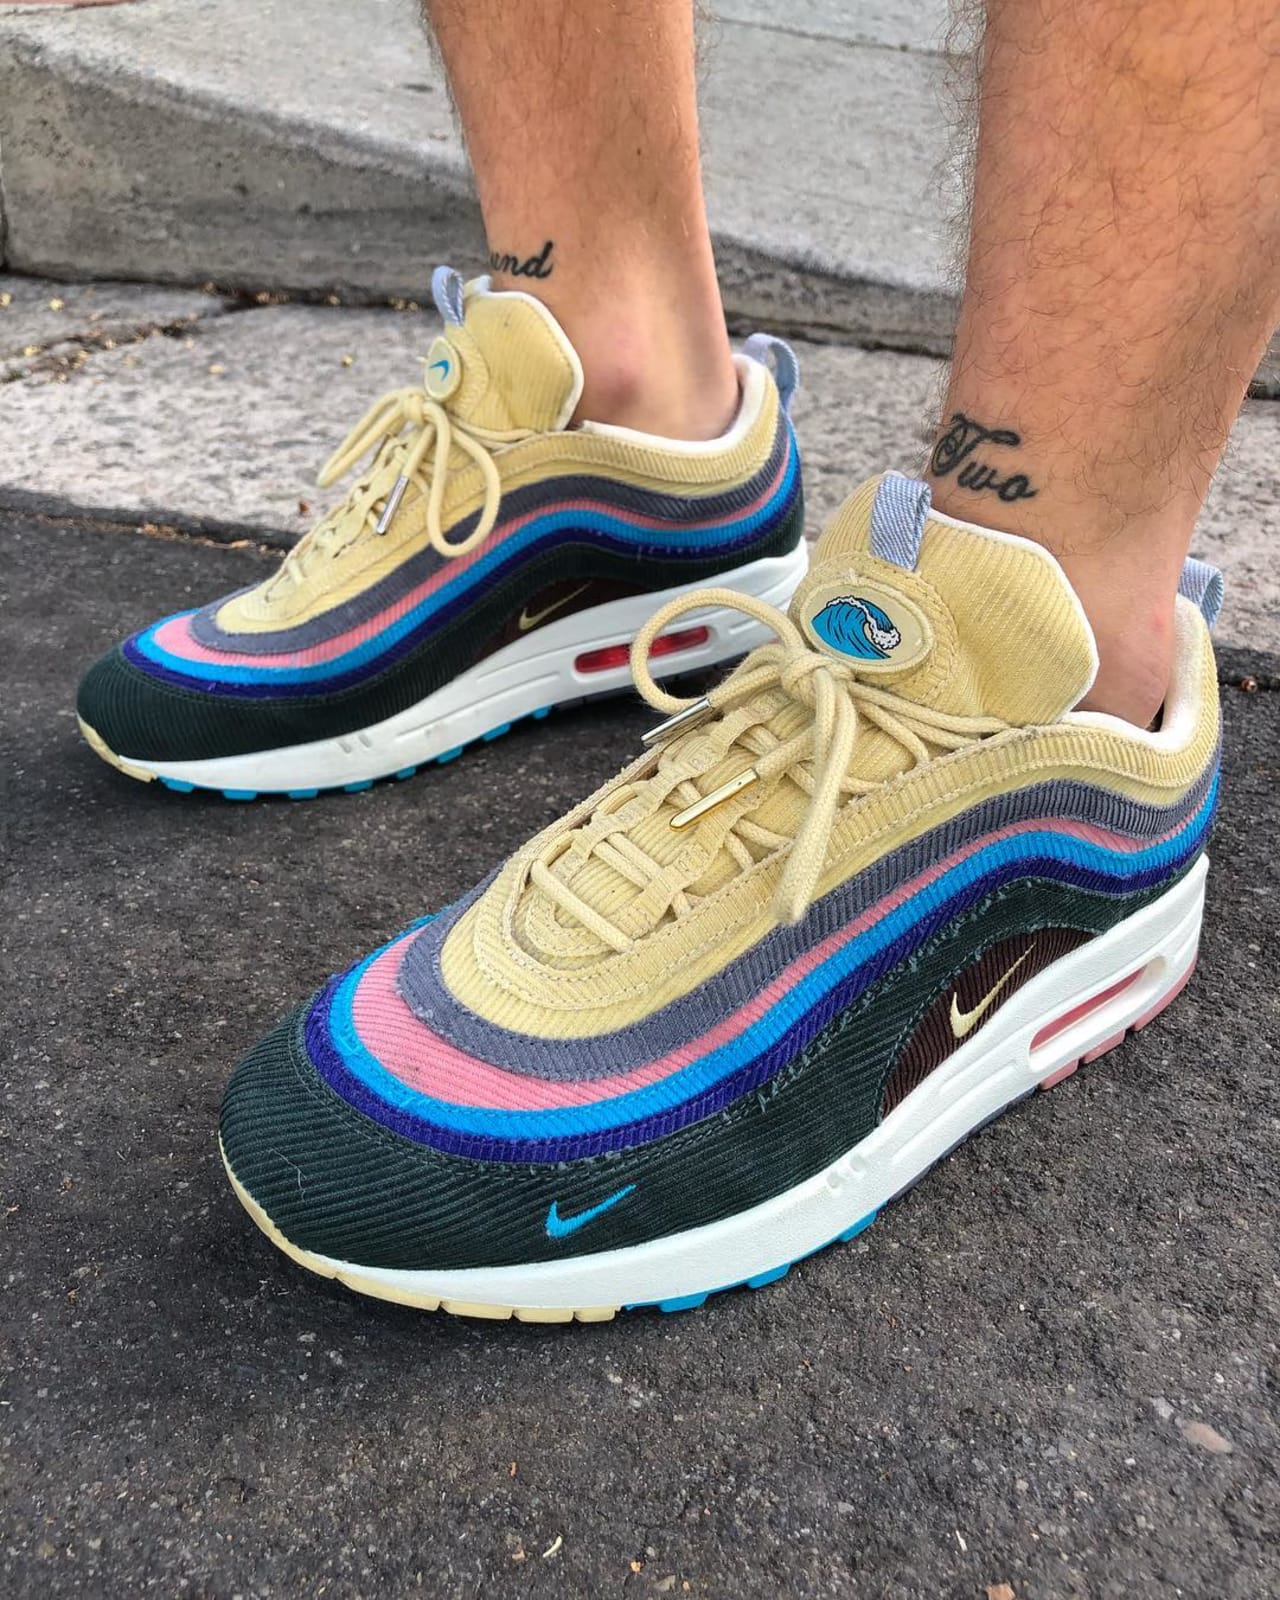 Sean Wotherspoon Nike Air Max 97 x Air Max 1 Hybrid Release Date 